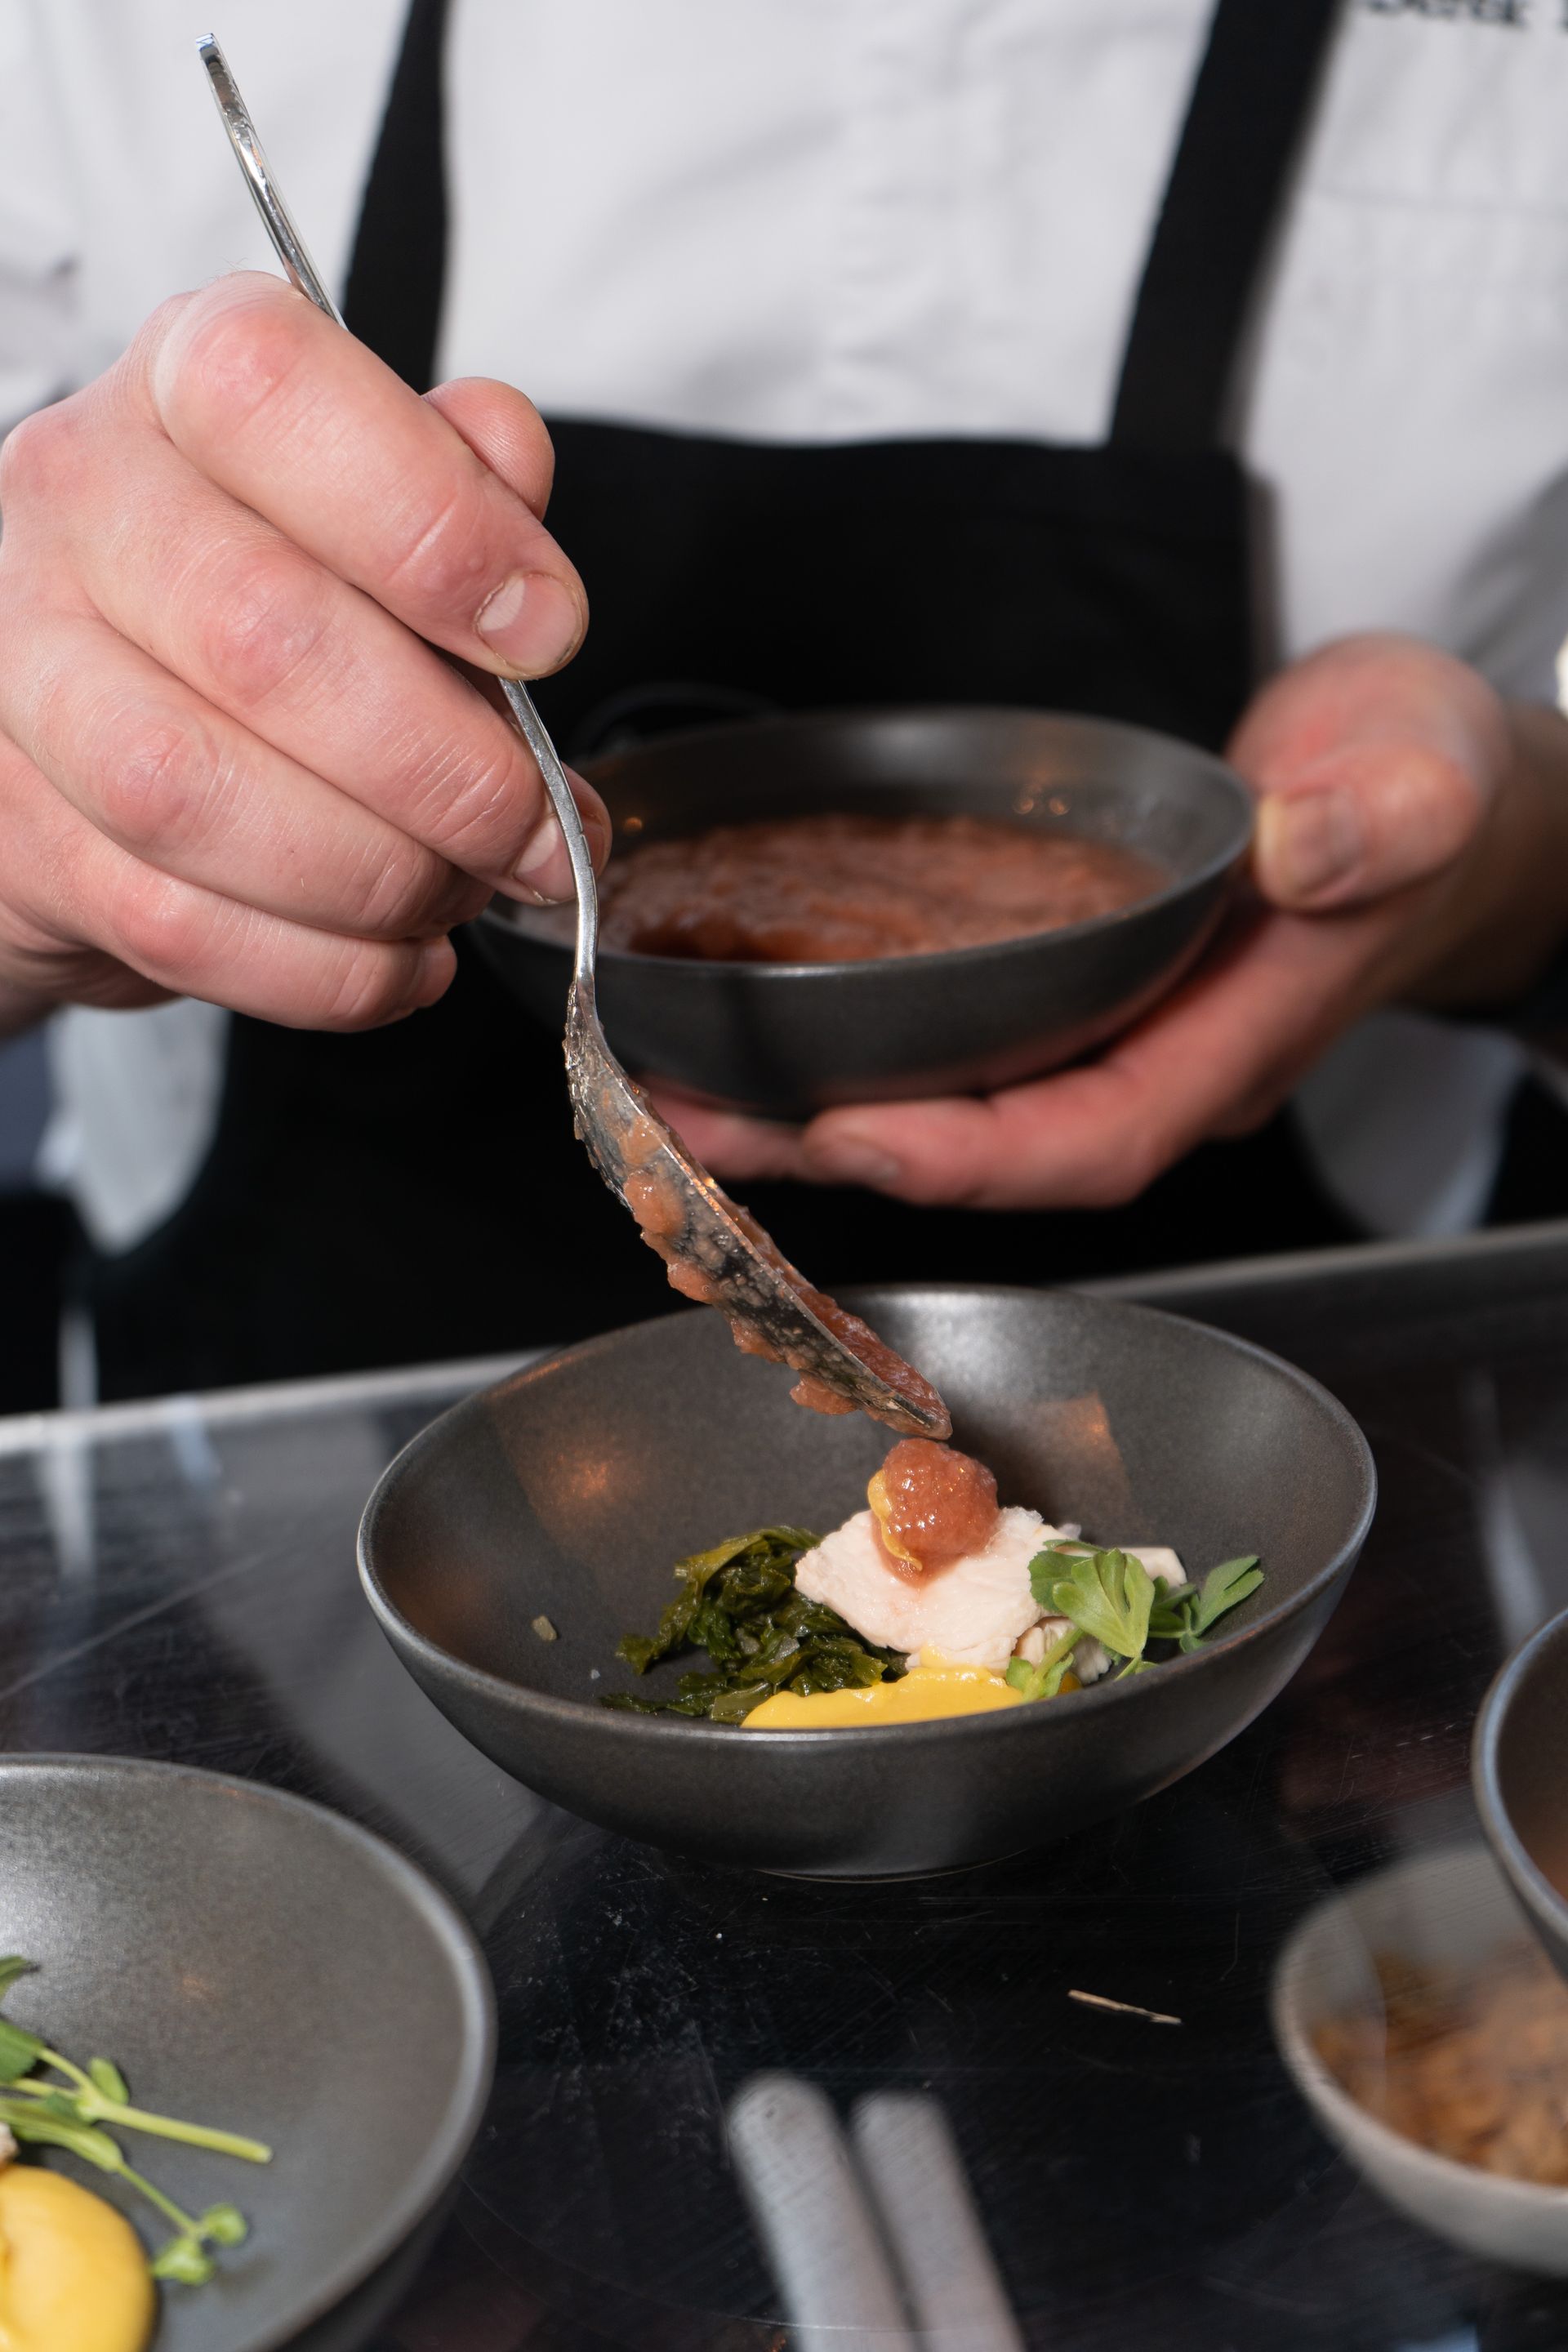 A chef is preparing food in a bowl with a spoon.